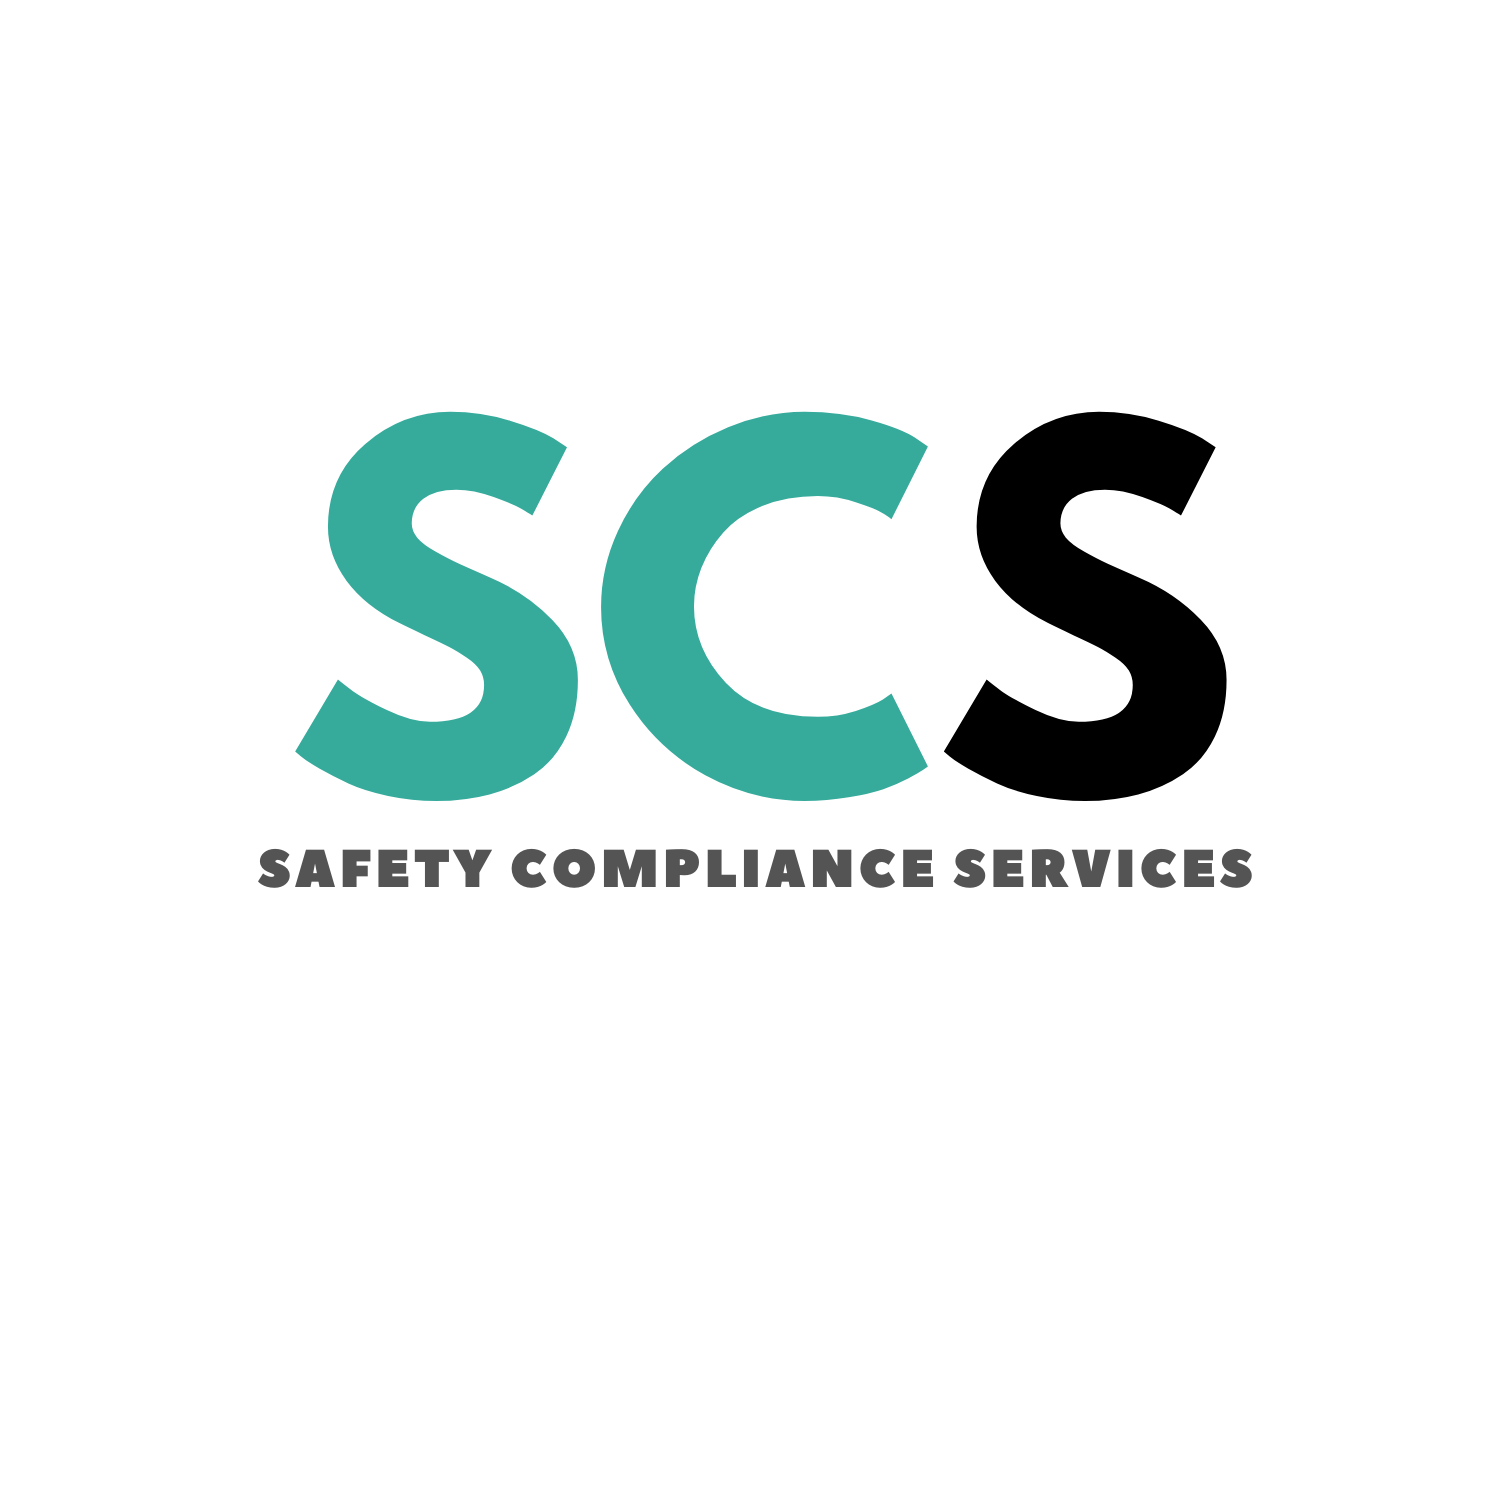 safetycomplianceservices